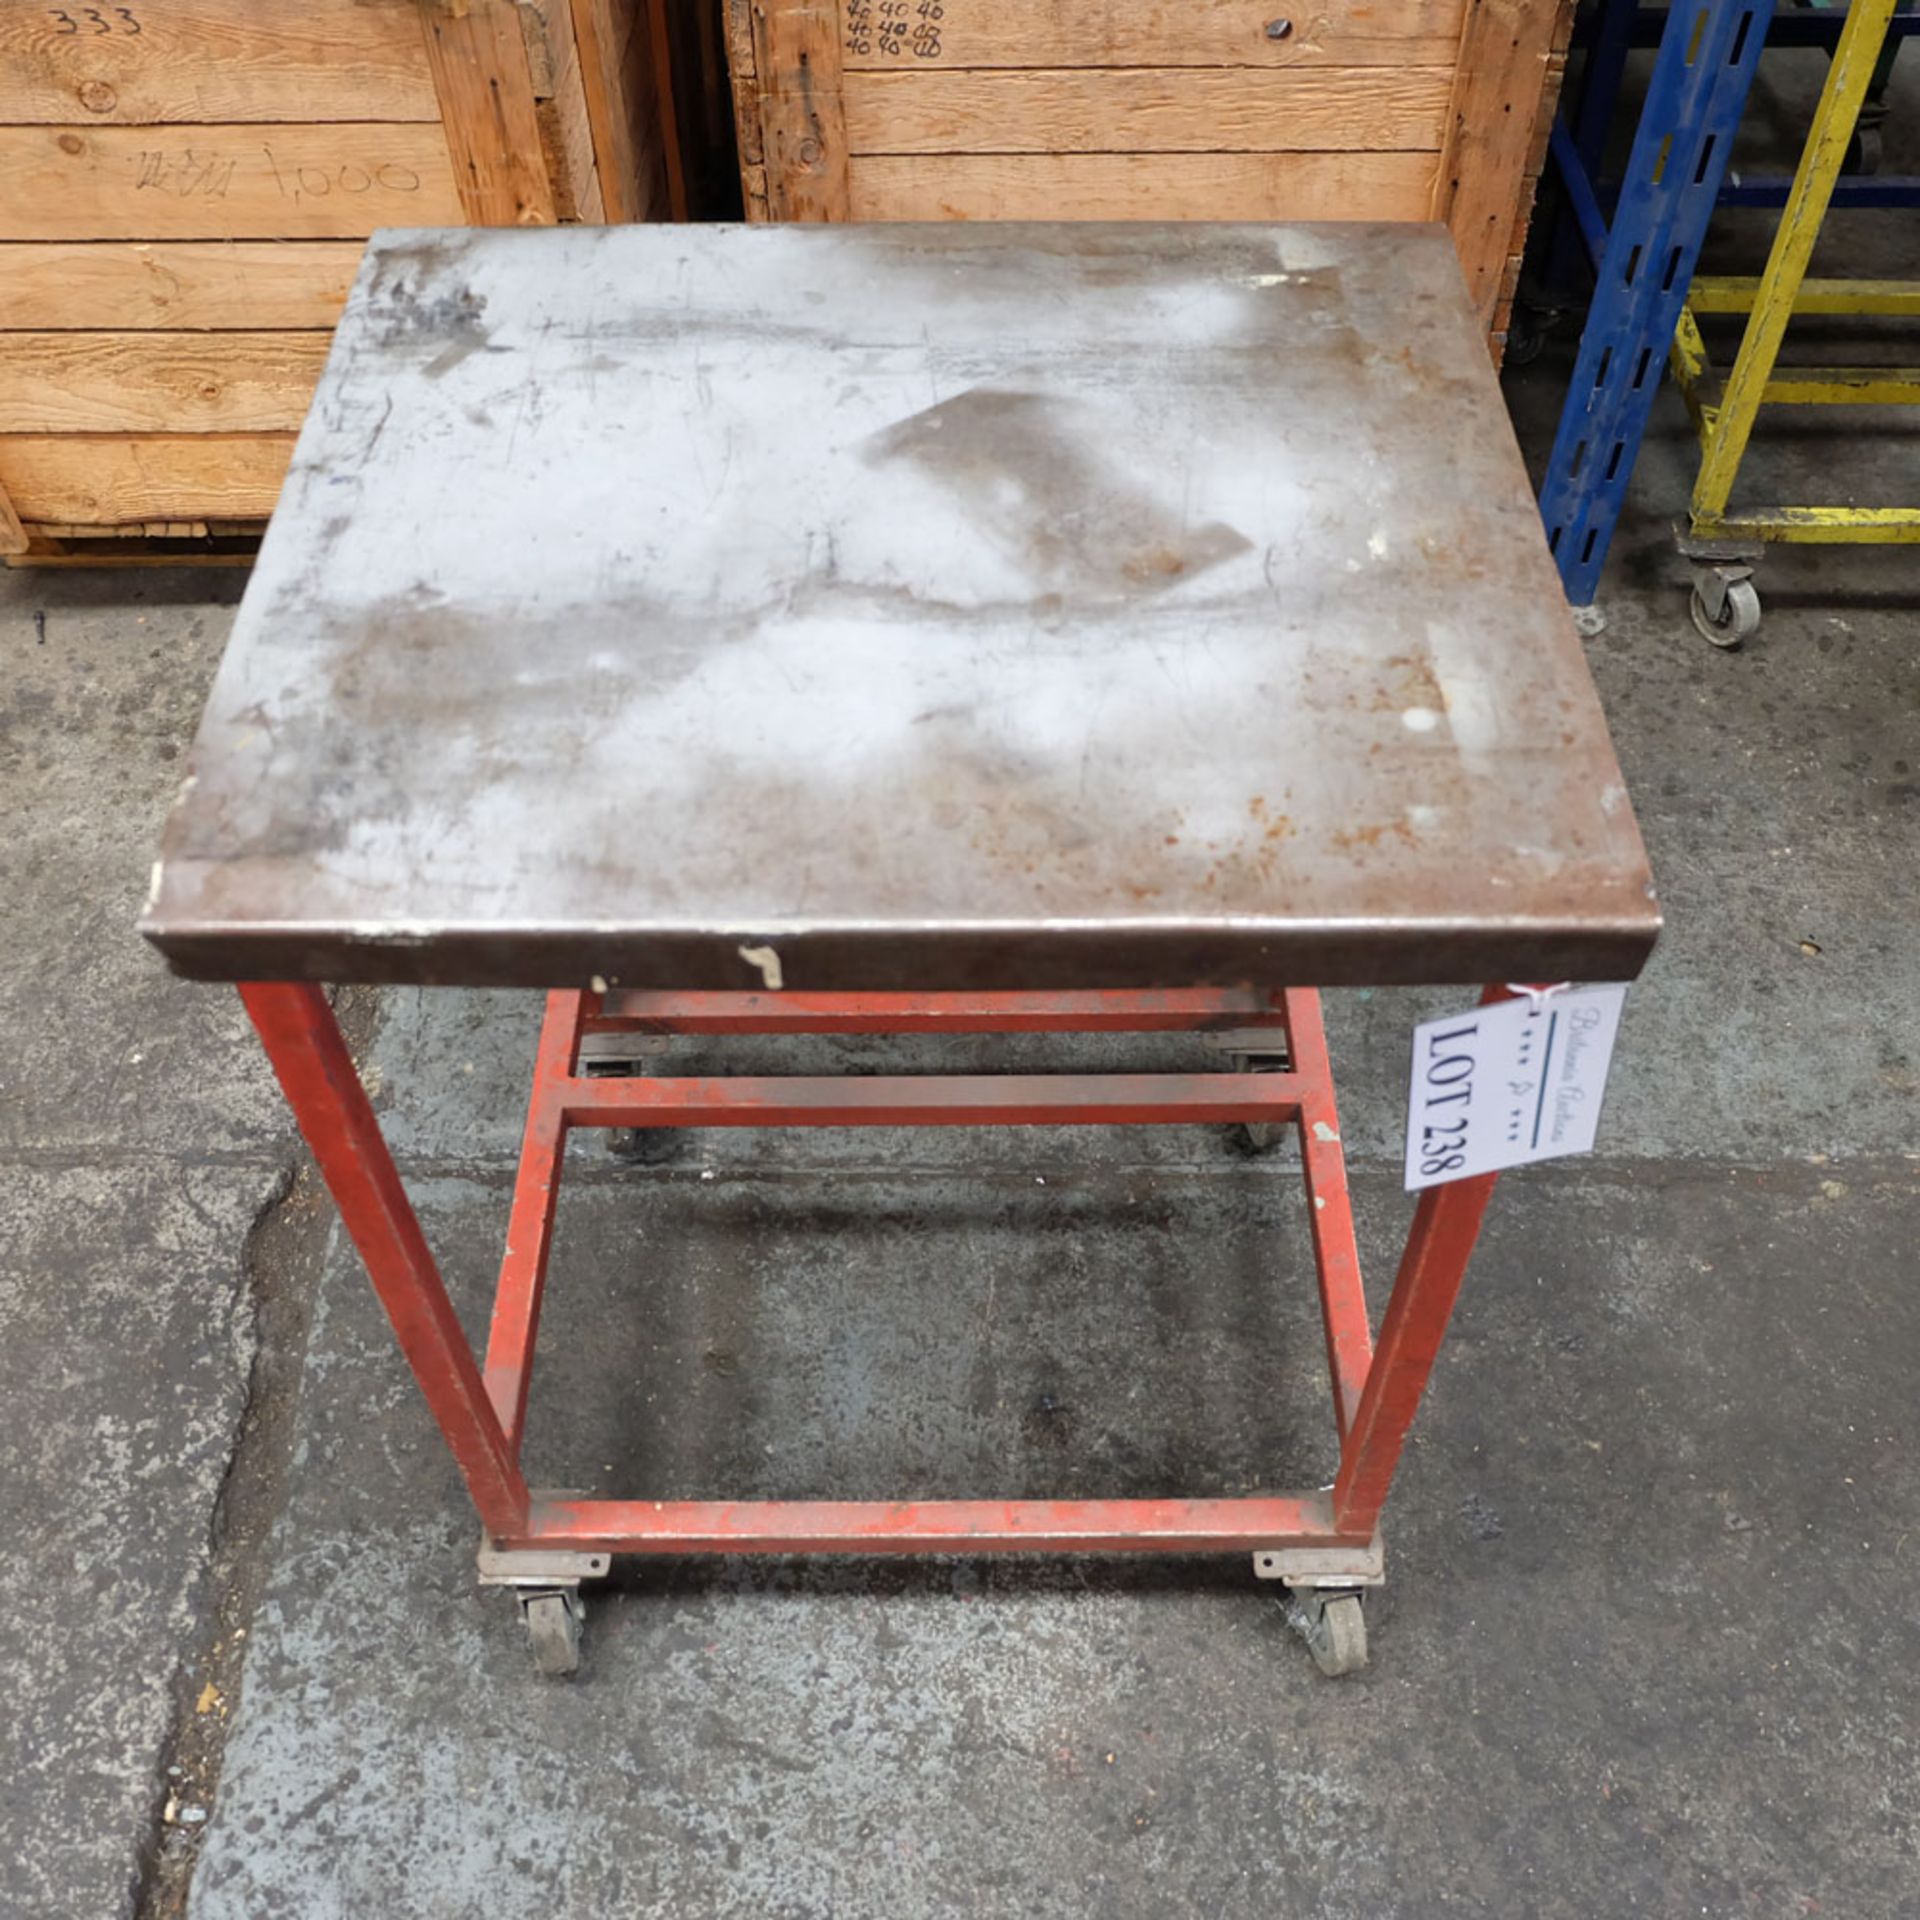 Mobile Steel Table on Castors. Approx Working Height 750mm. Approx Surface Size 580mm x 510mm.